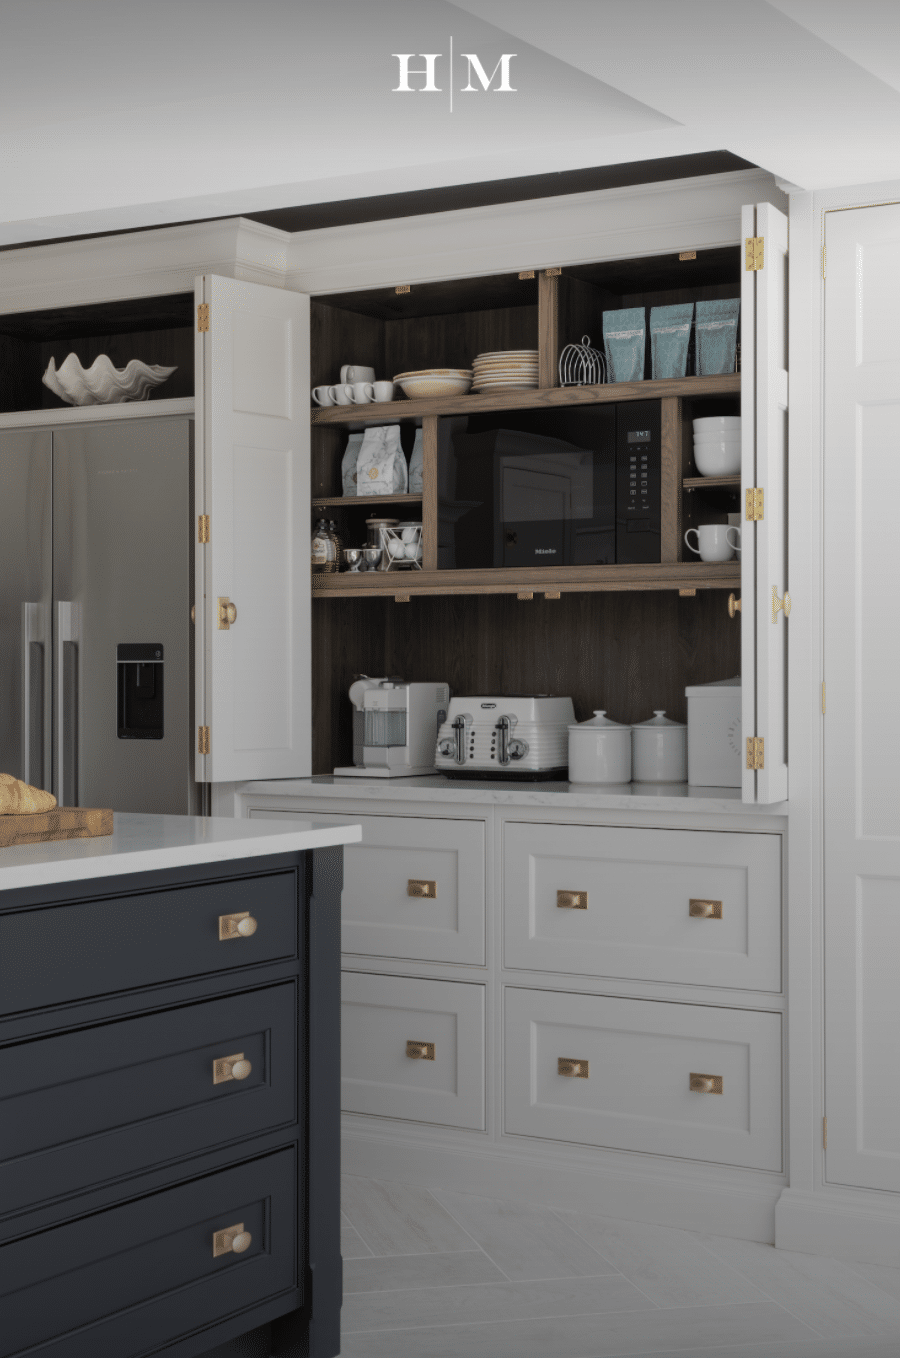 Stylish Kitchen Organization Ideas for the New Year with the talented Bespoke kitchen designers Humphrey Munson. Beautiful storage for all of you kitchen decor. Paul Craig Photography